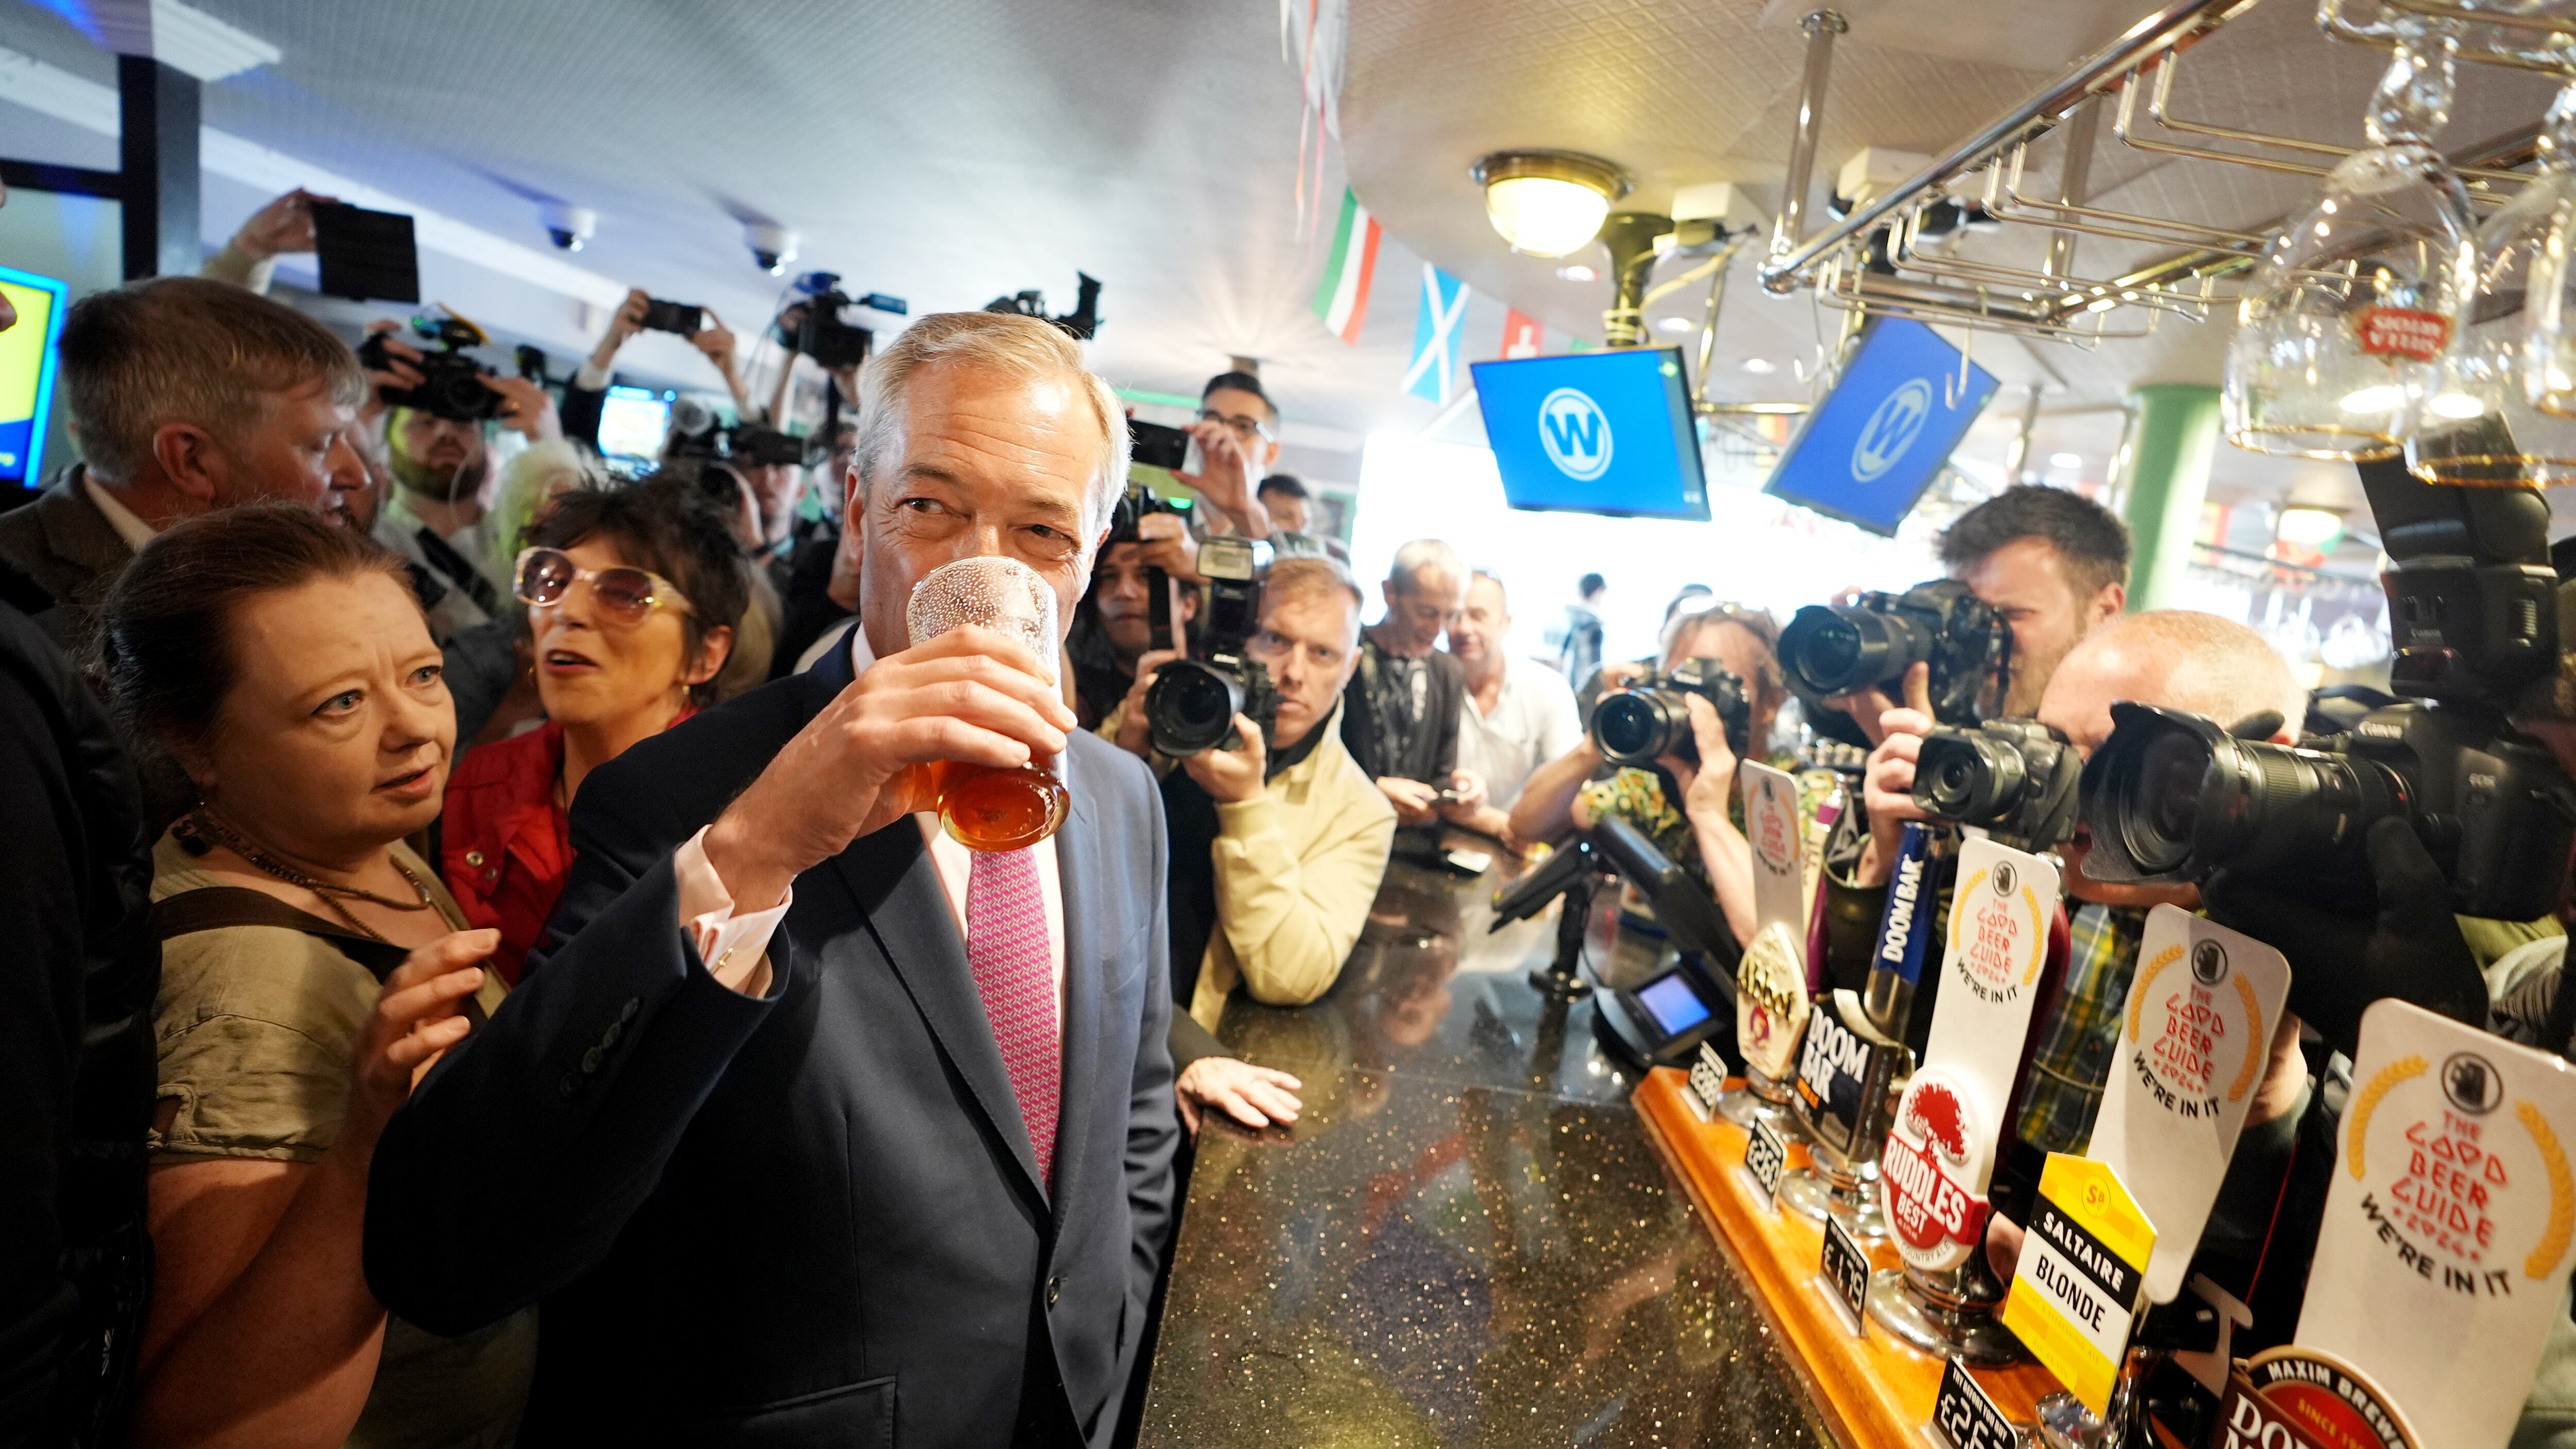 Leader of Reform UK Nigel Farage enjoys a pint of beer as he launches his General Election campaign in Clacton-on-Sea, Essex